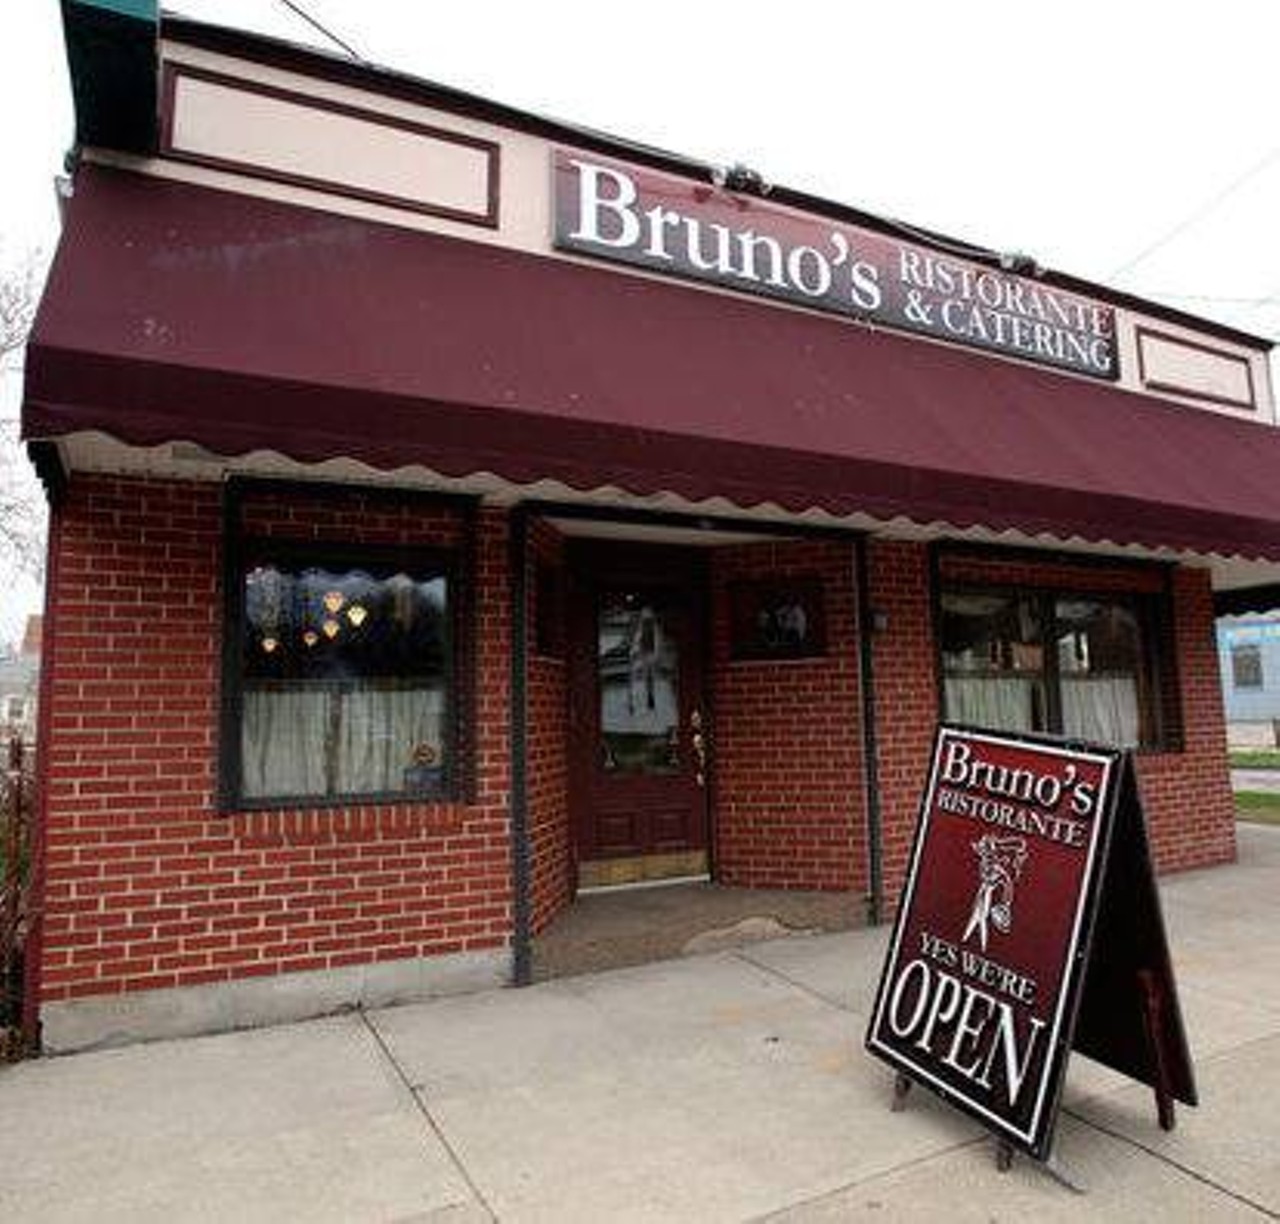  Bruno&#146;s Ristorante
2644 West 41st St., Cleveland 
Stepping into this cozy neighborhood ristorante &#150; with its wooden bar, linoleum floors, and menu of pizza, pasta, and assorted parmigianas, cacciatores, and marsalas &#150; is like traveling back in time to the days when Italian restaurateurs baked their own breads, made their own pastas, and served it all in charming, intimate spaces. Almost everything on the "full-meal deal" menu is delish. But when it comes to fried calamari and baked lasagna, Bruno's scores among the very best. 
Photo via Bruno&#146;s Ristorante/Facebook